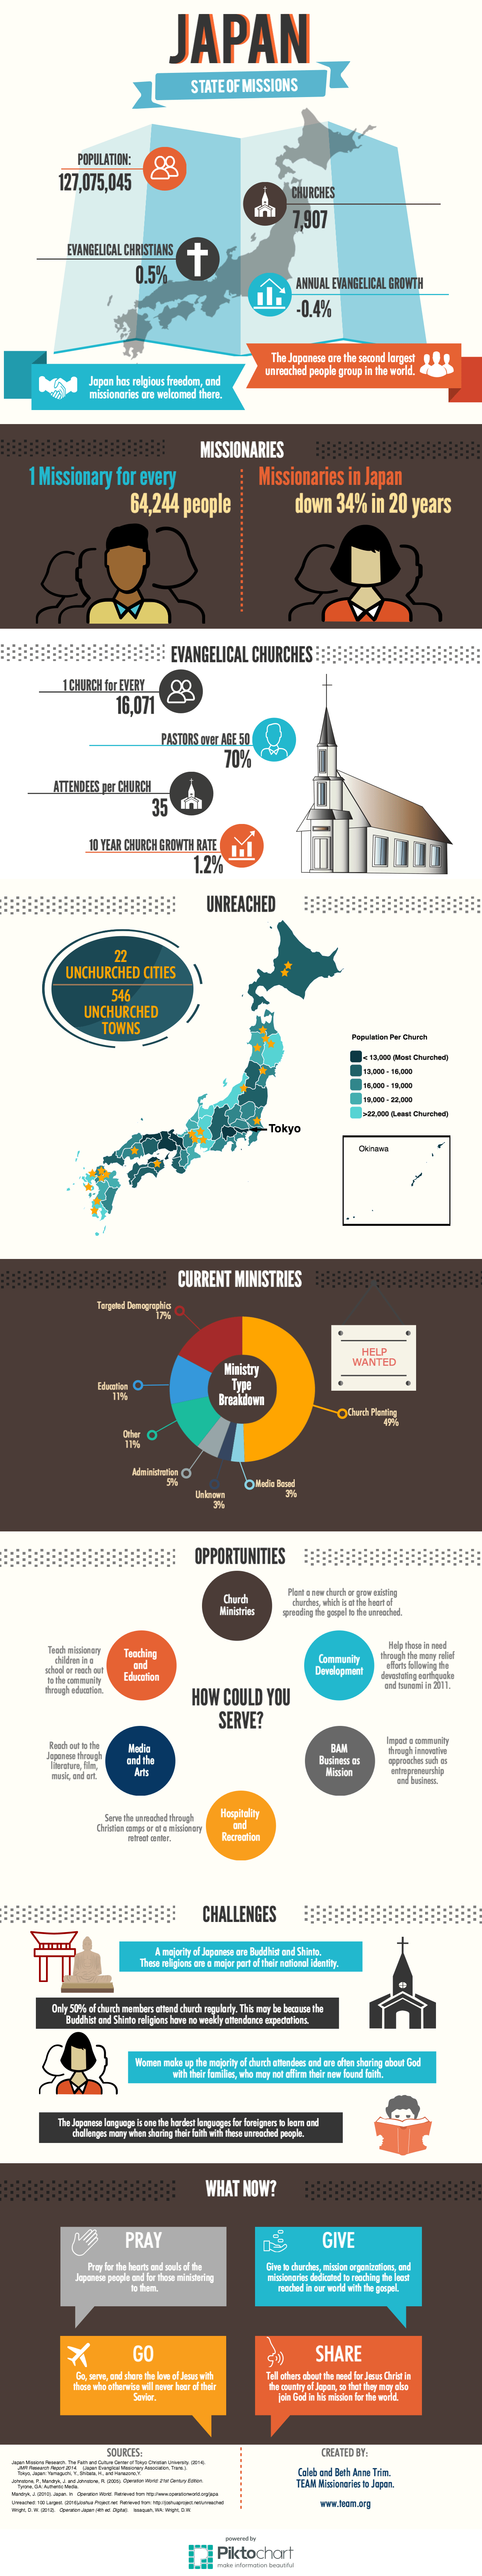 Infographic on the state of missions in Japan used with permission from our friends at OMF.